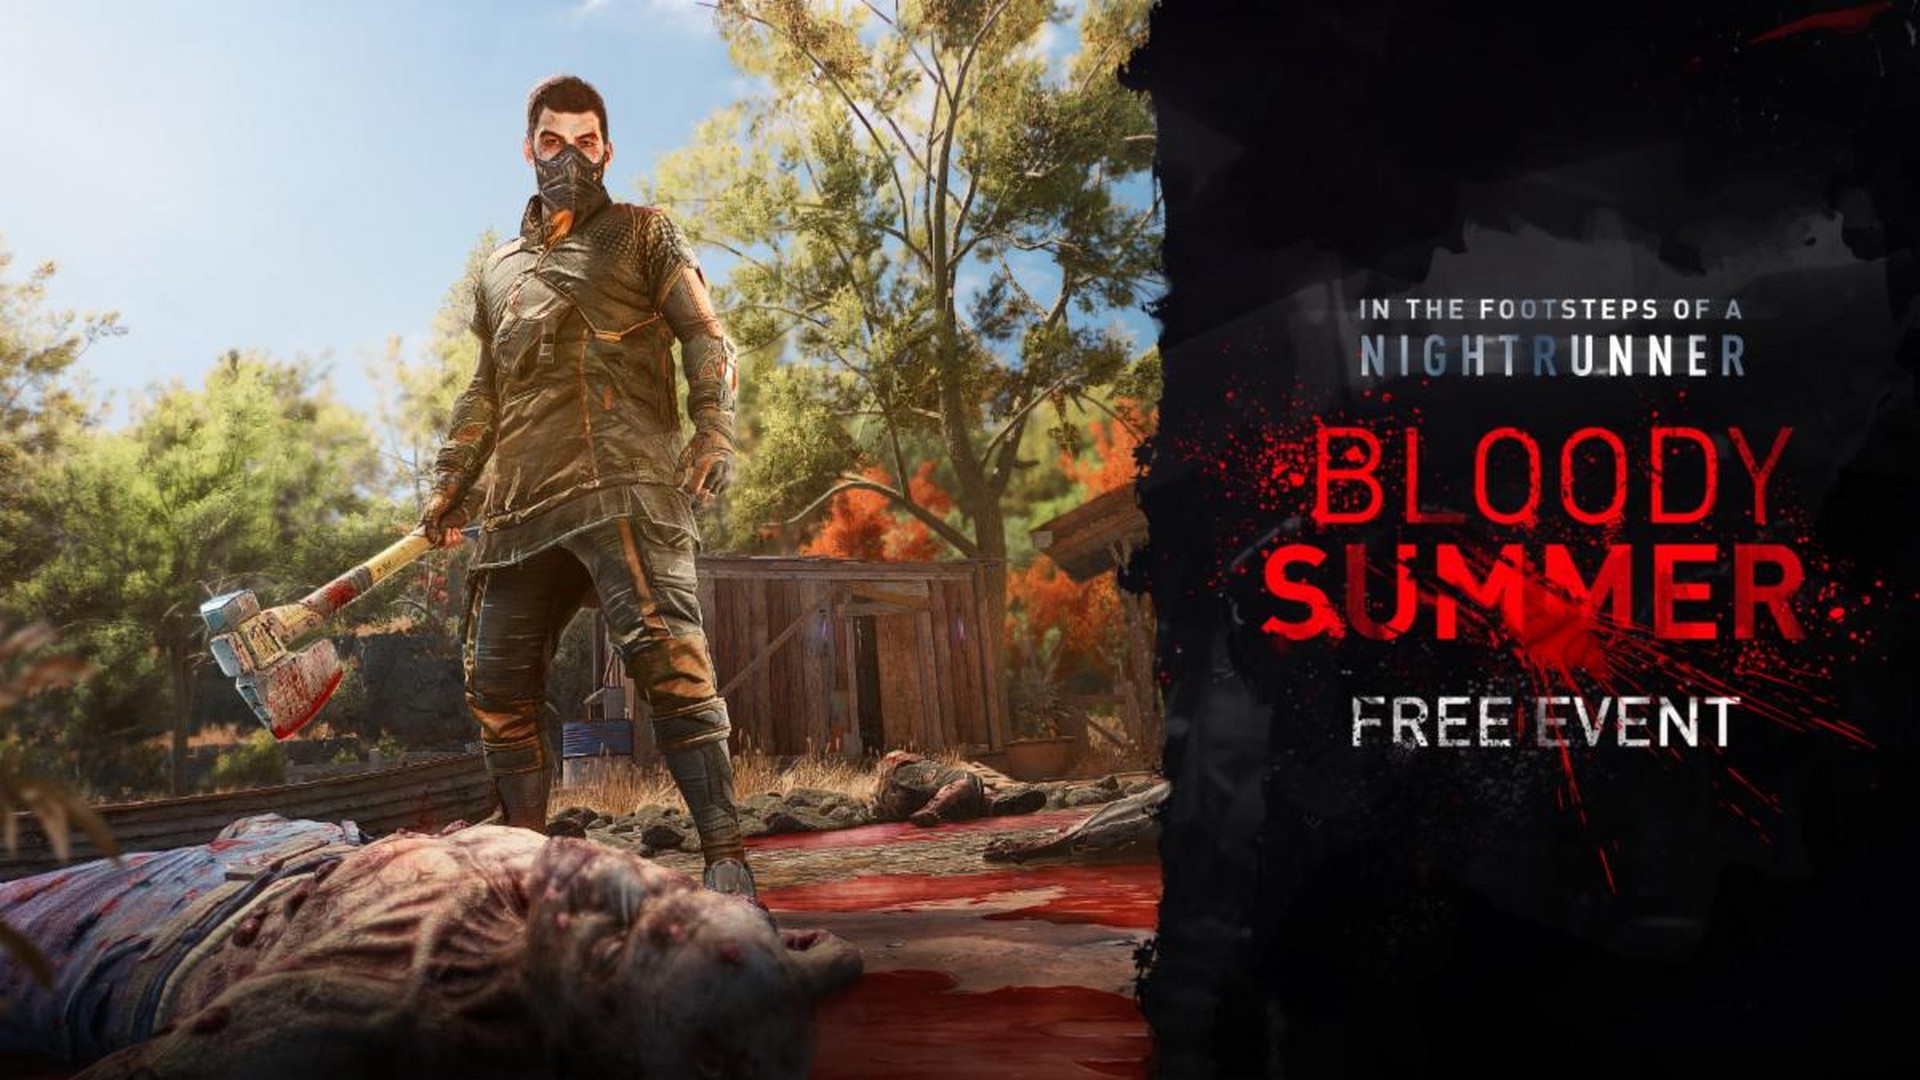 Dying Light 2 Debuts Free ‘Bloody Summer’ In-Game Event